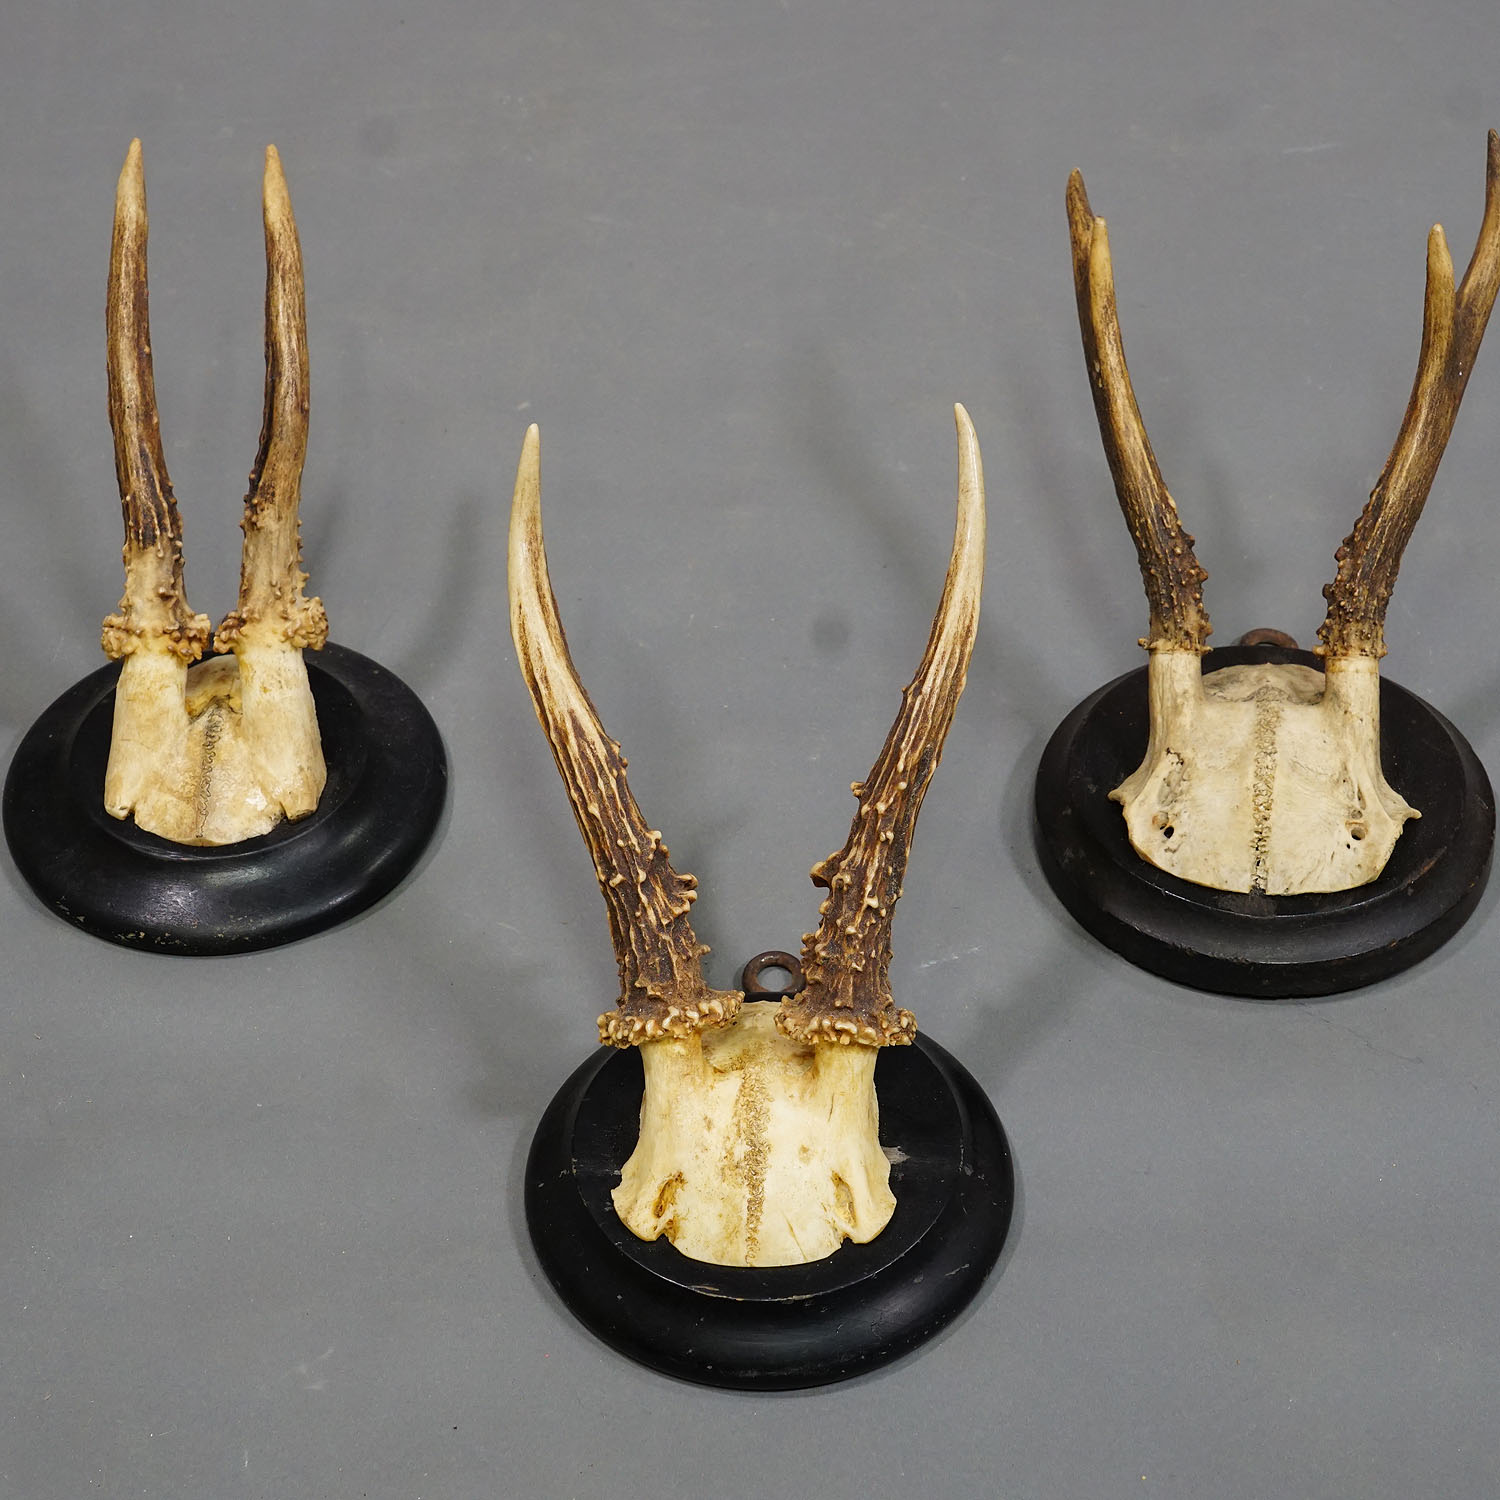 Six Antique Deer Trophies on Wooden Plaques Germany ca. 1940s